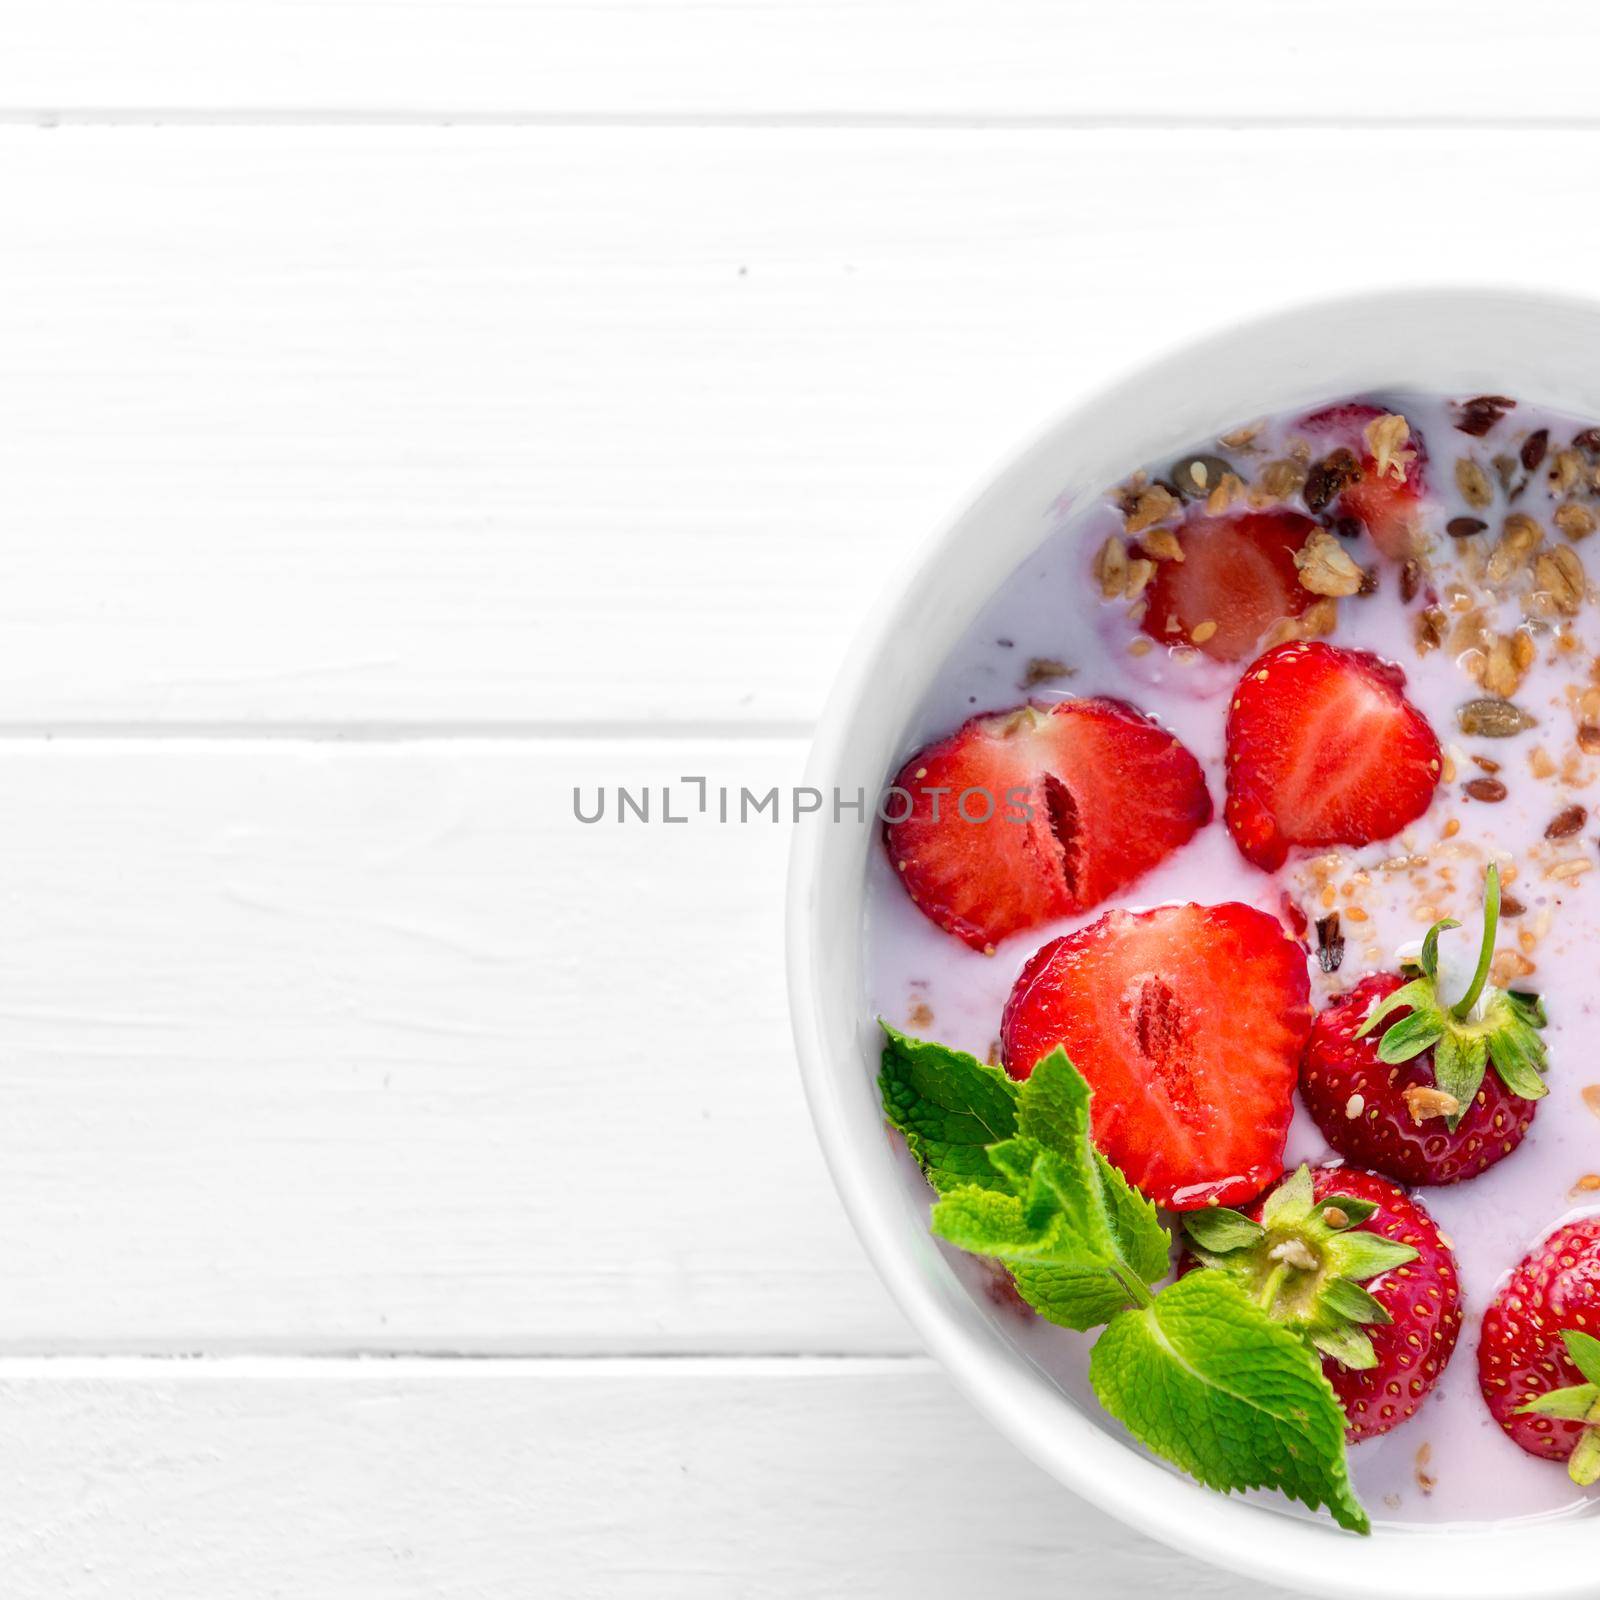 Huge bowl of granola with strawberries and mint leaves, additional textspace left on side, topview